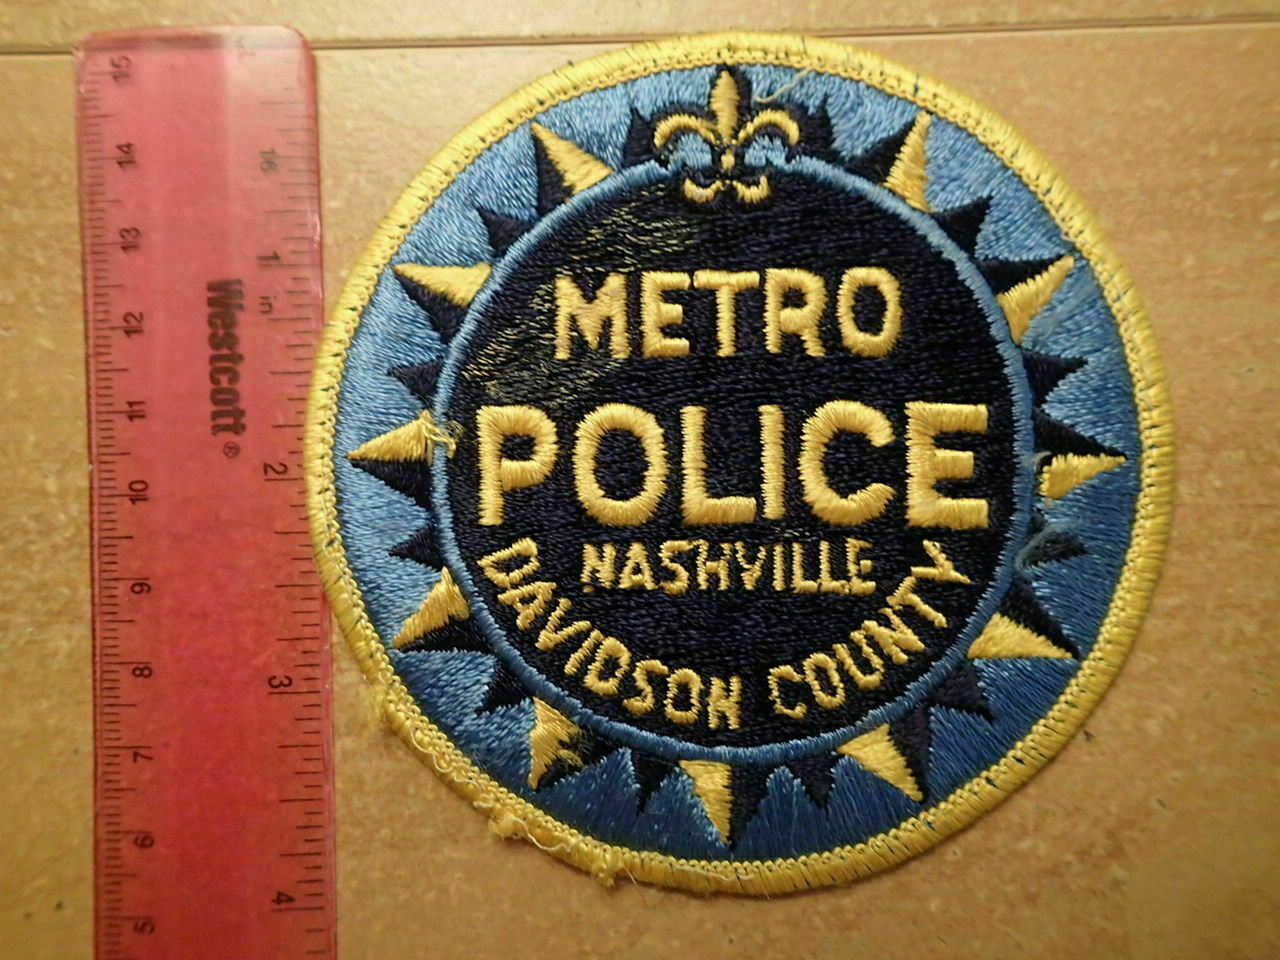 Embroidered Uniform Patch-metro Police, Nashville, Tennessee-excellent Cond.